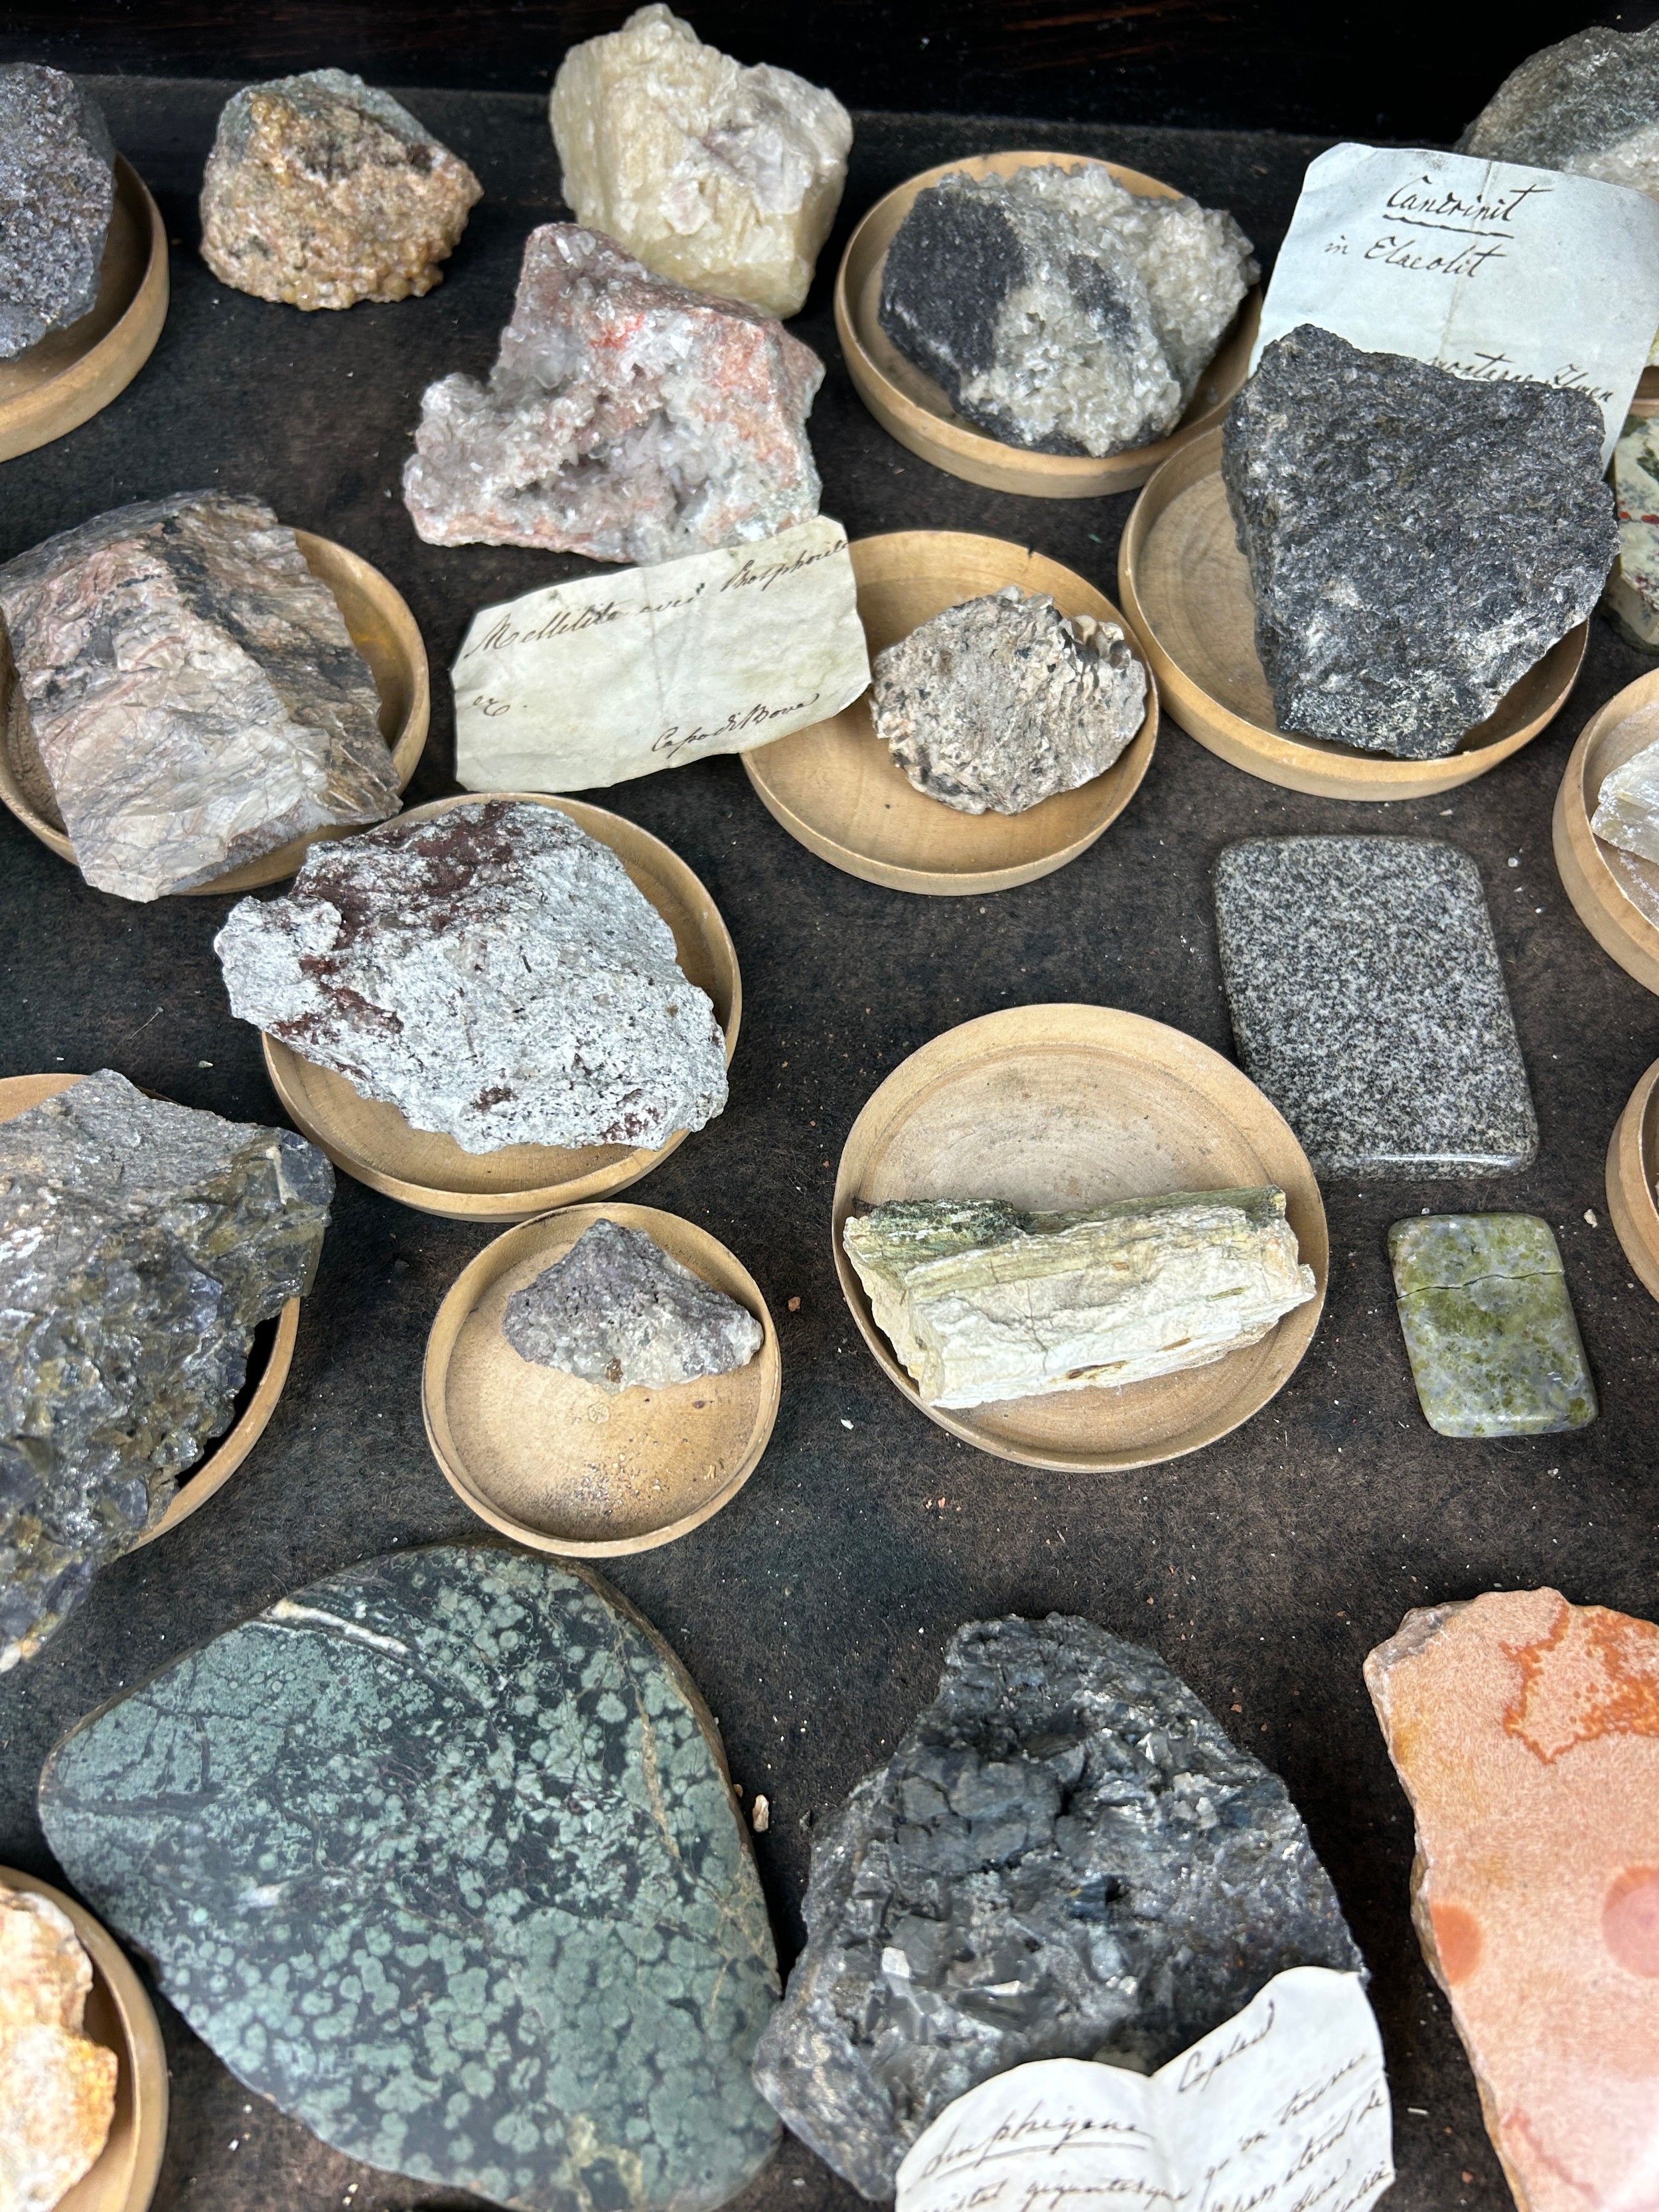 A RARE CABINET COLLECTION OF MINERALS CIRCA 1810-1860, including minerals probably collected by - Image 26 of 33